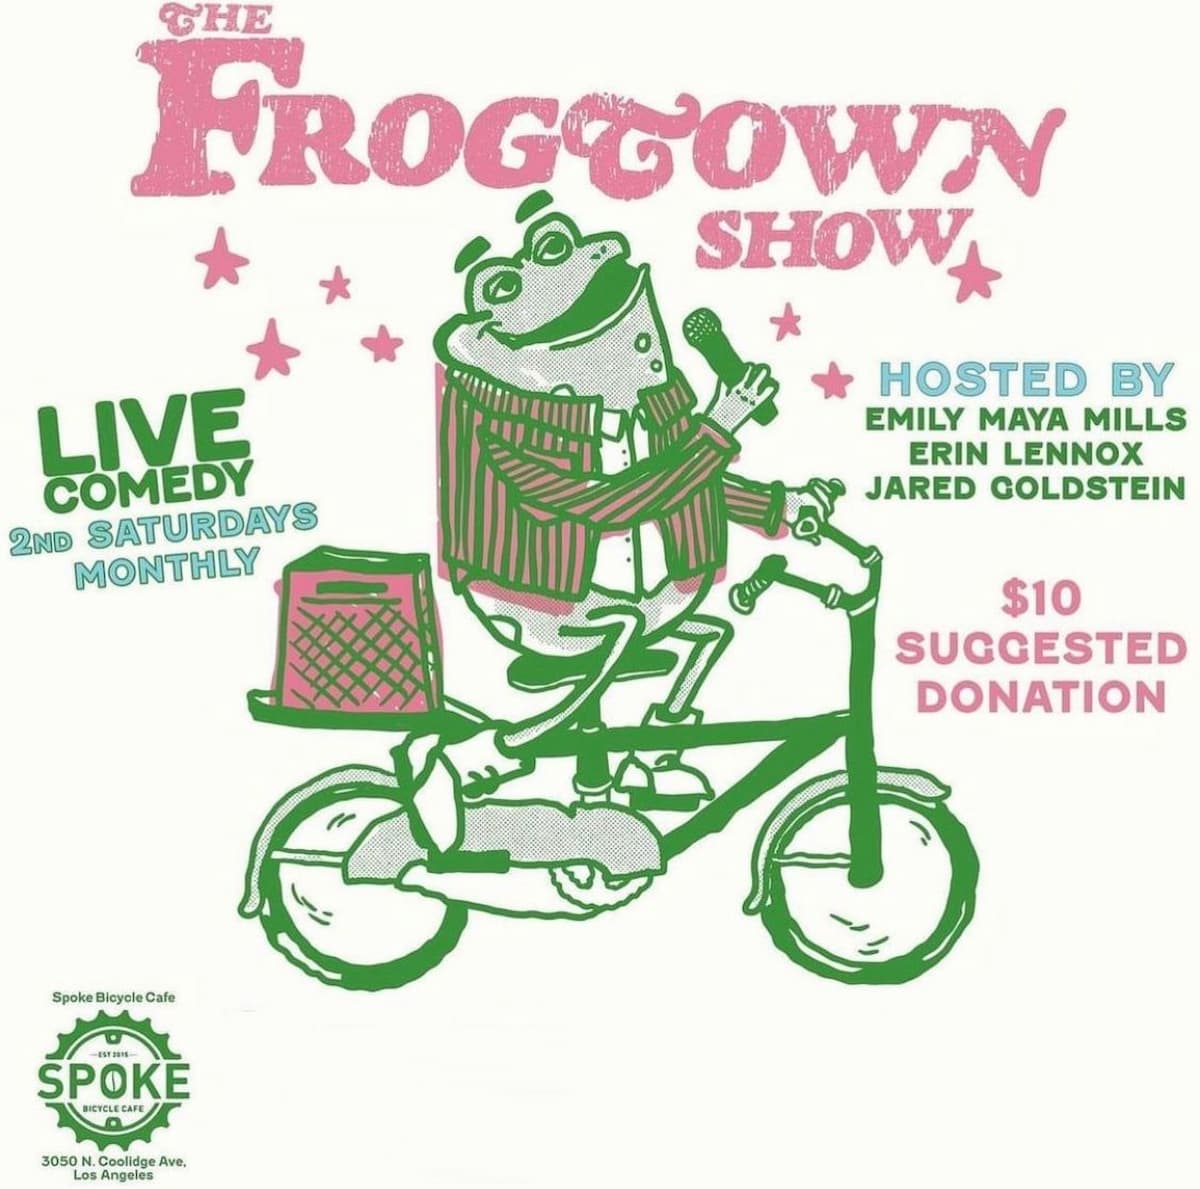 The Frogtown Show